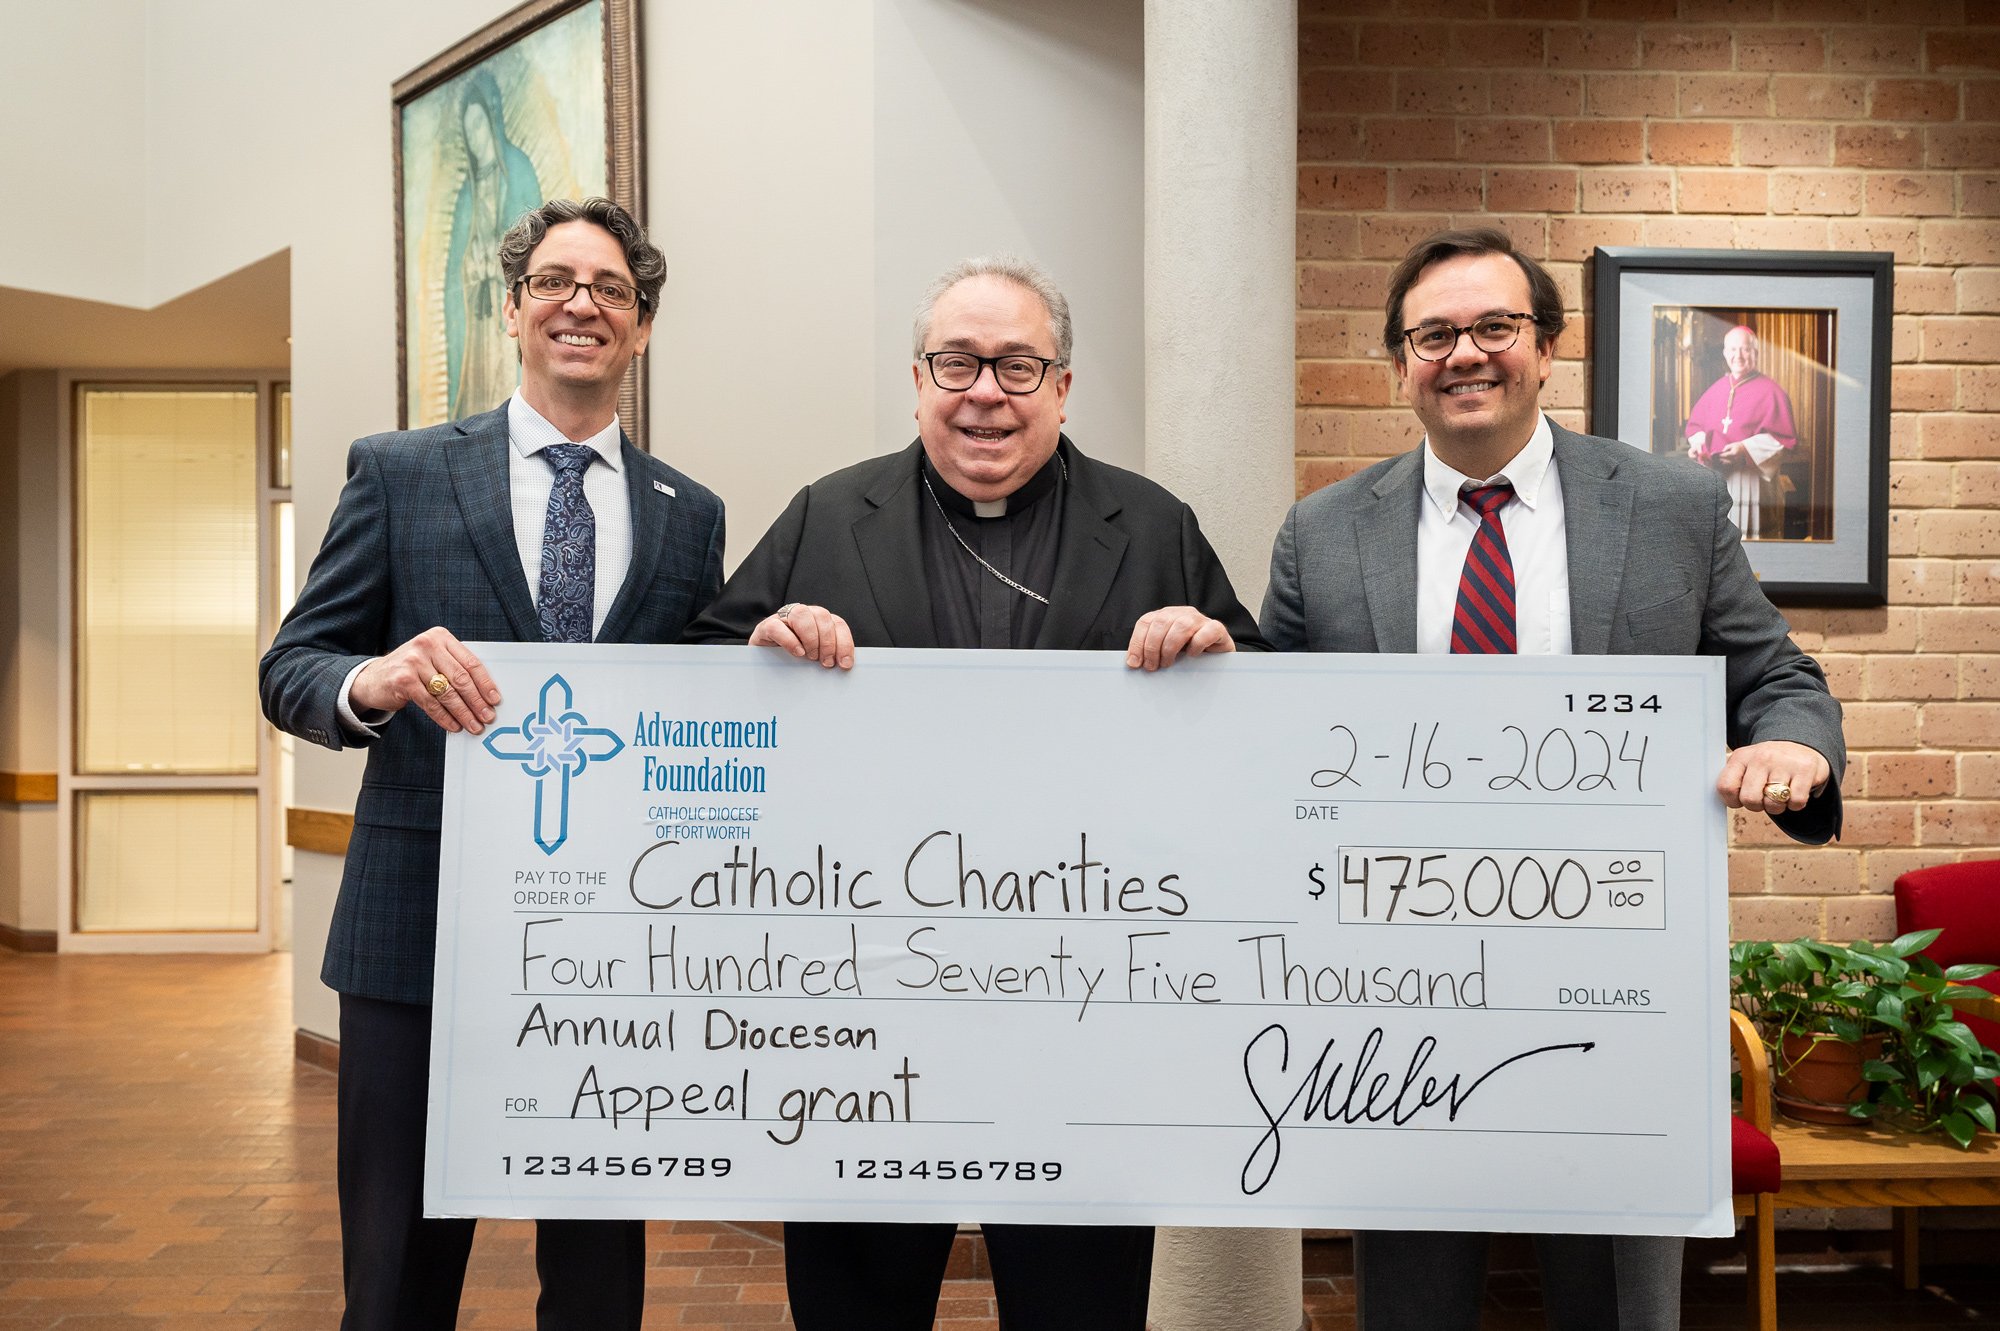 Annual Diocesan Appeal gifts $475,000 to Catholic Charities Fort Worth’s anti-poverty work